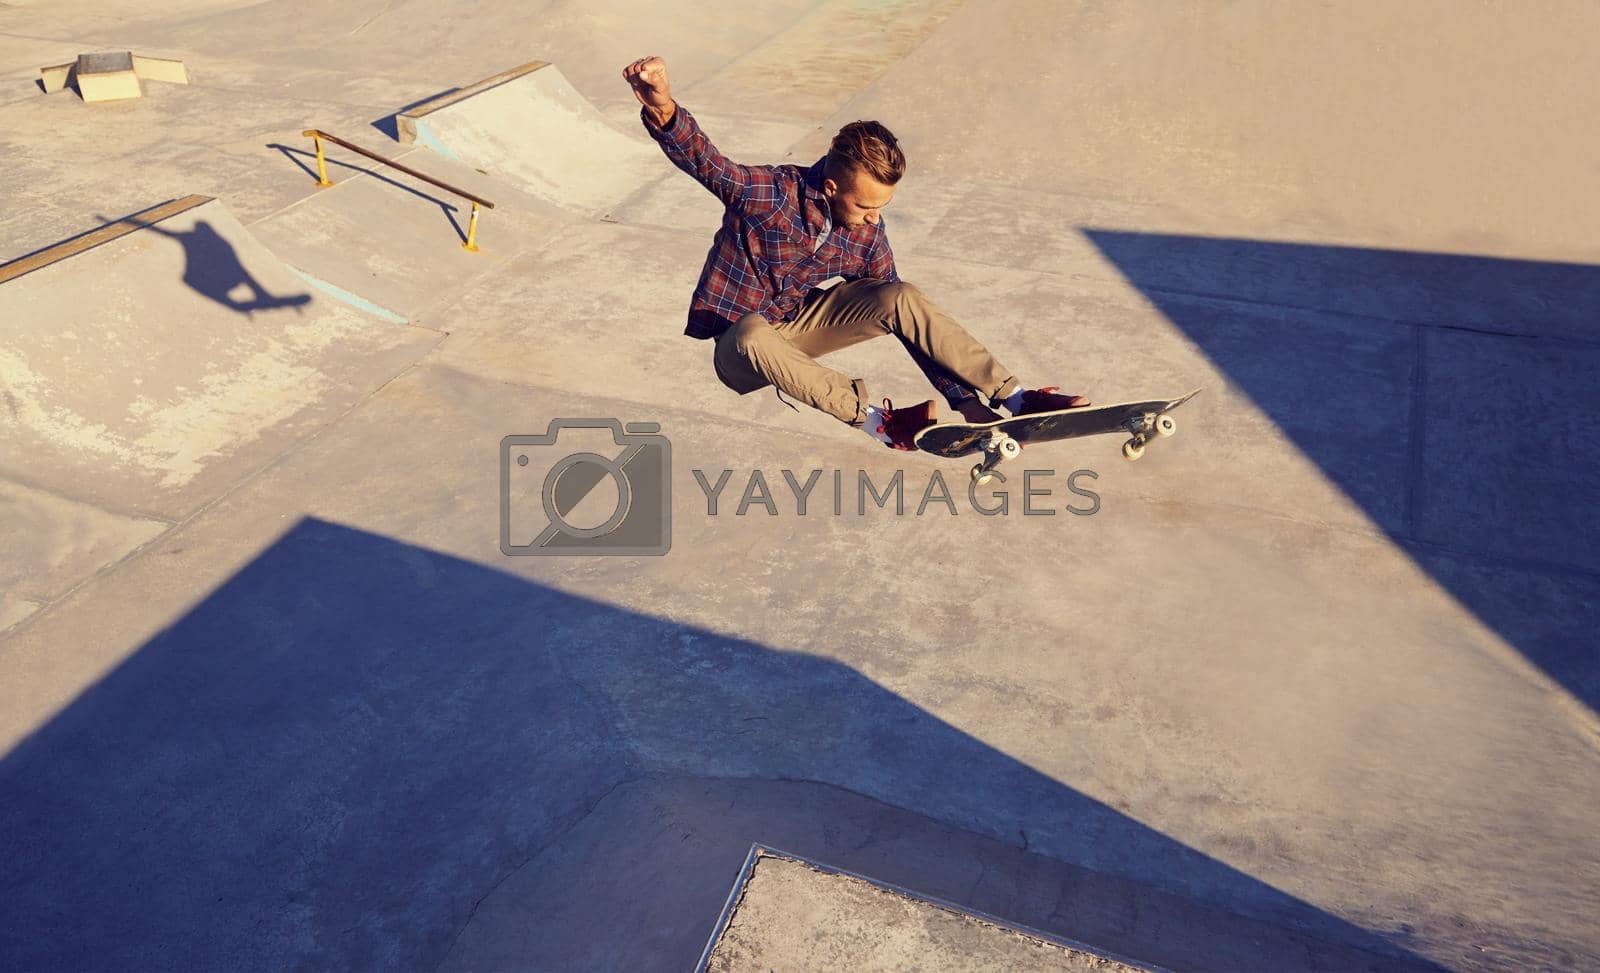 Royalty free image of But can he land it...A young man doing tricks on his skateboard at the skate park. by YuriArcurs